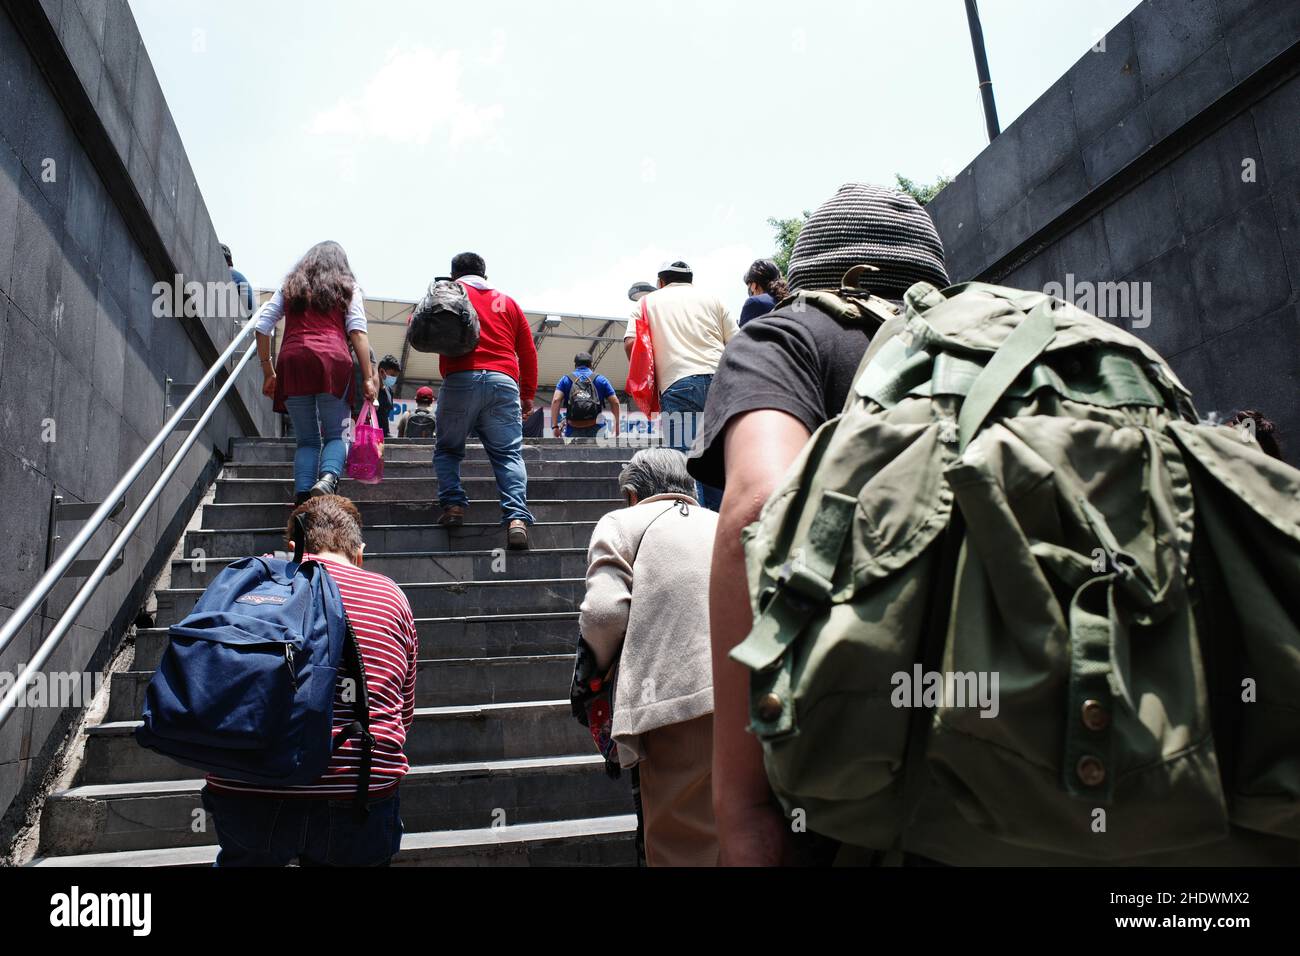 People coming out of the subway in Mexico City Stock Photo